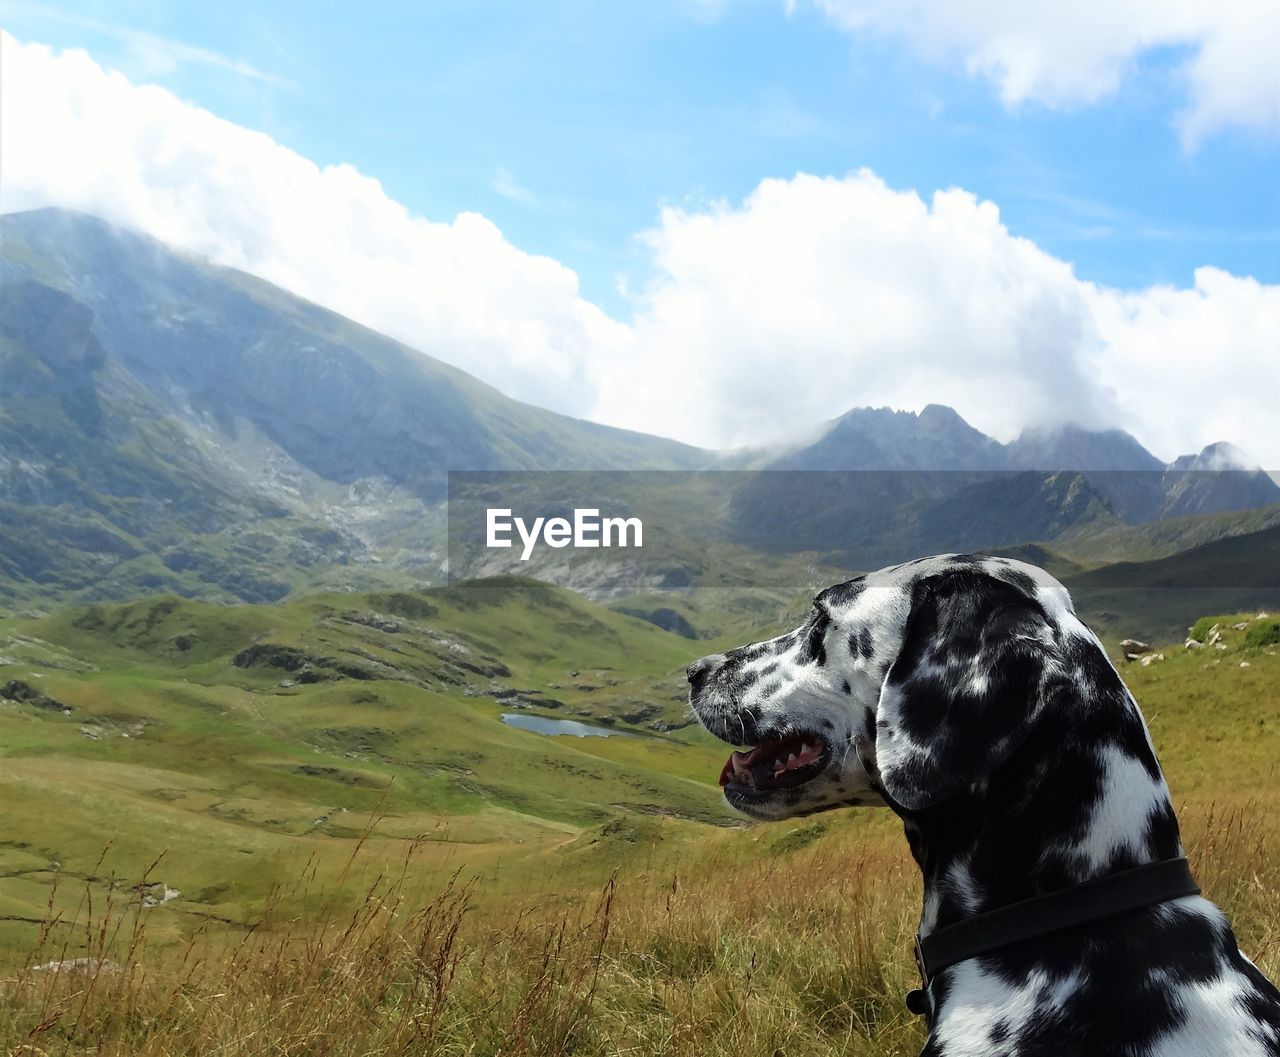 Dalmatian looking at mountains against sky 